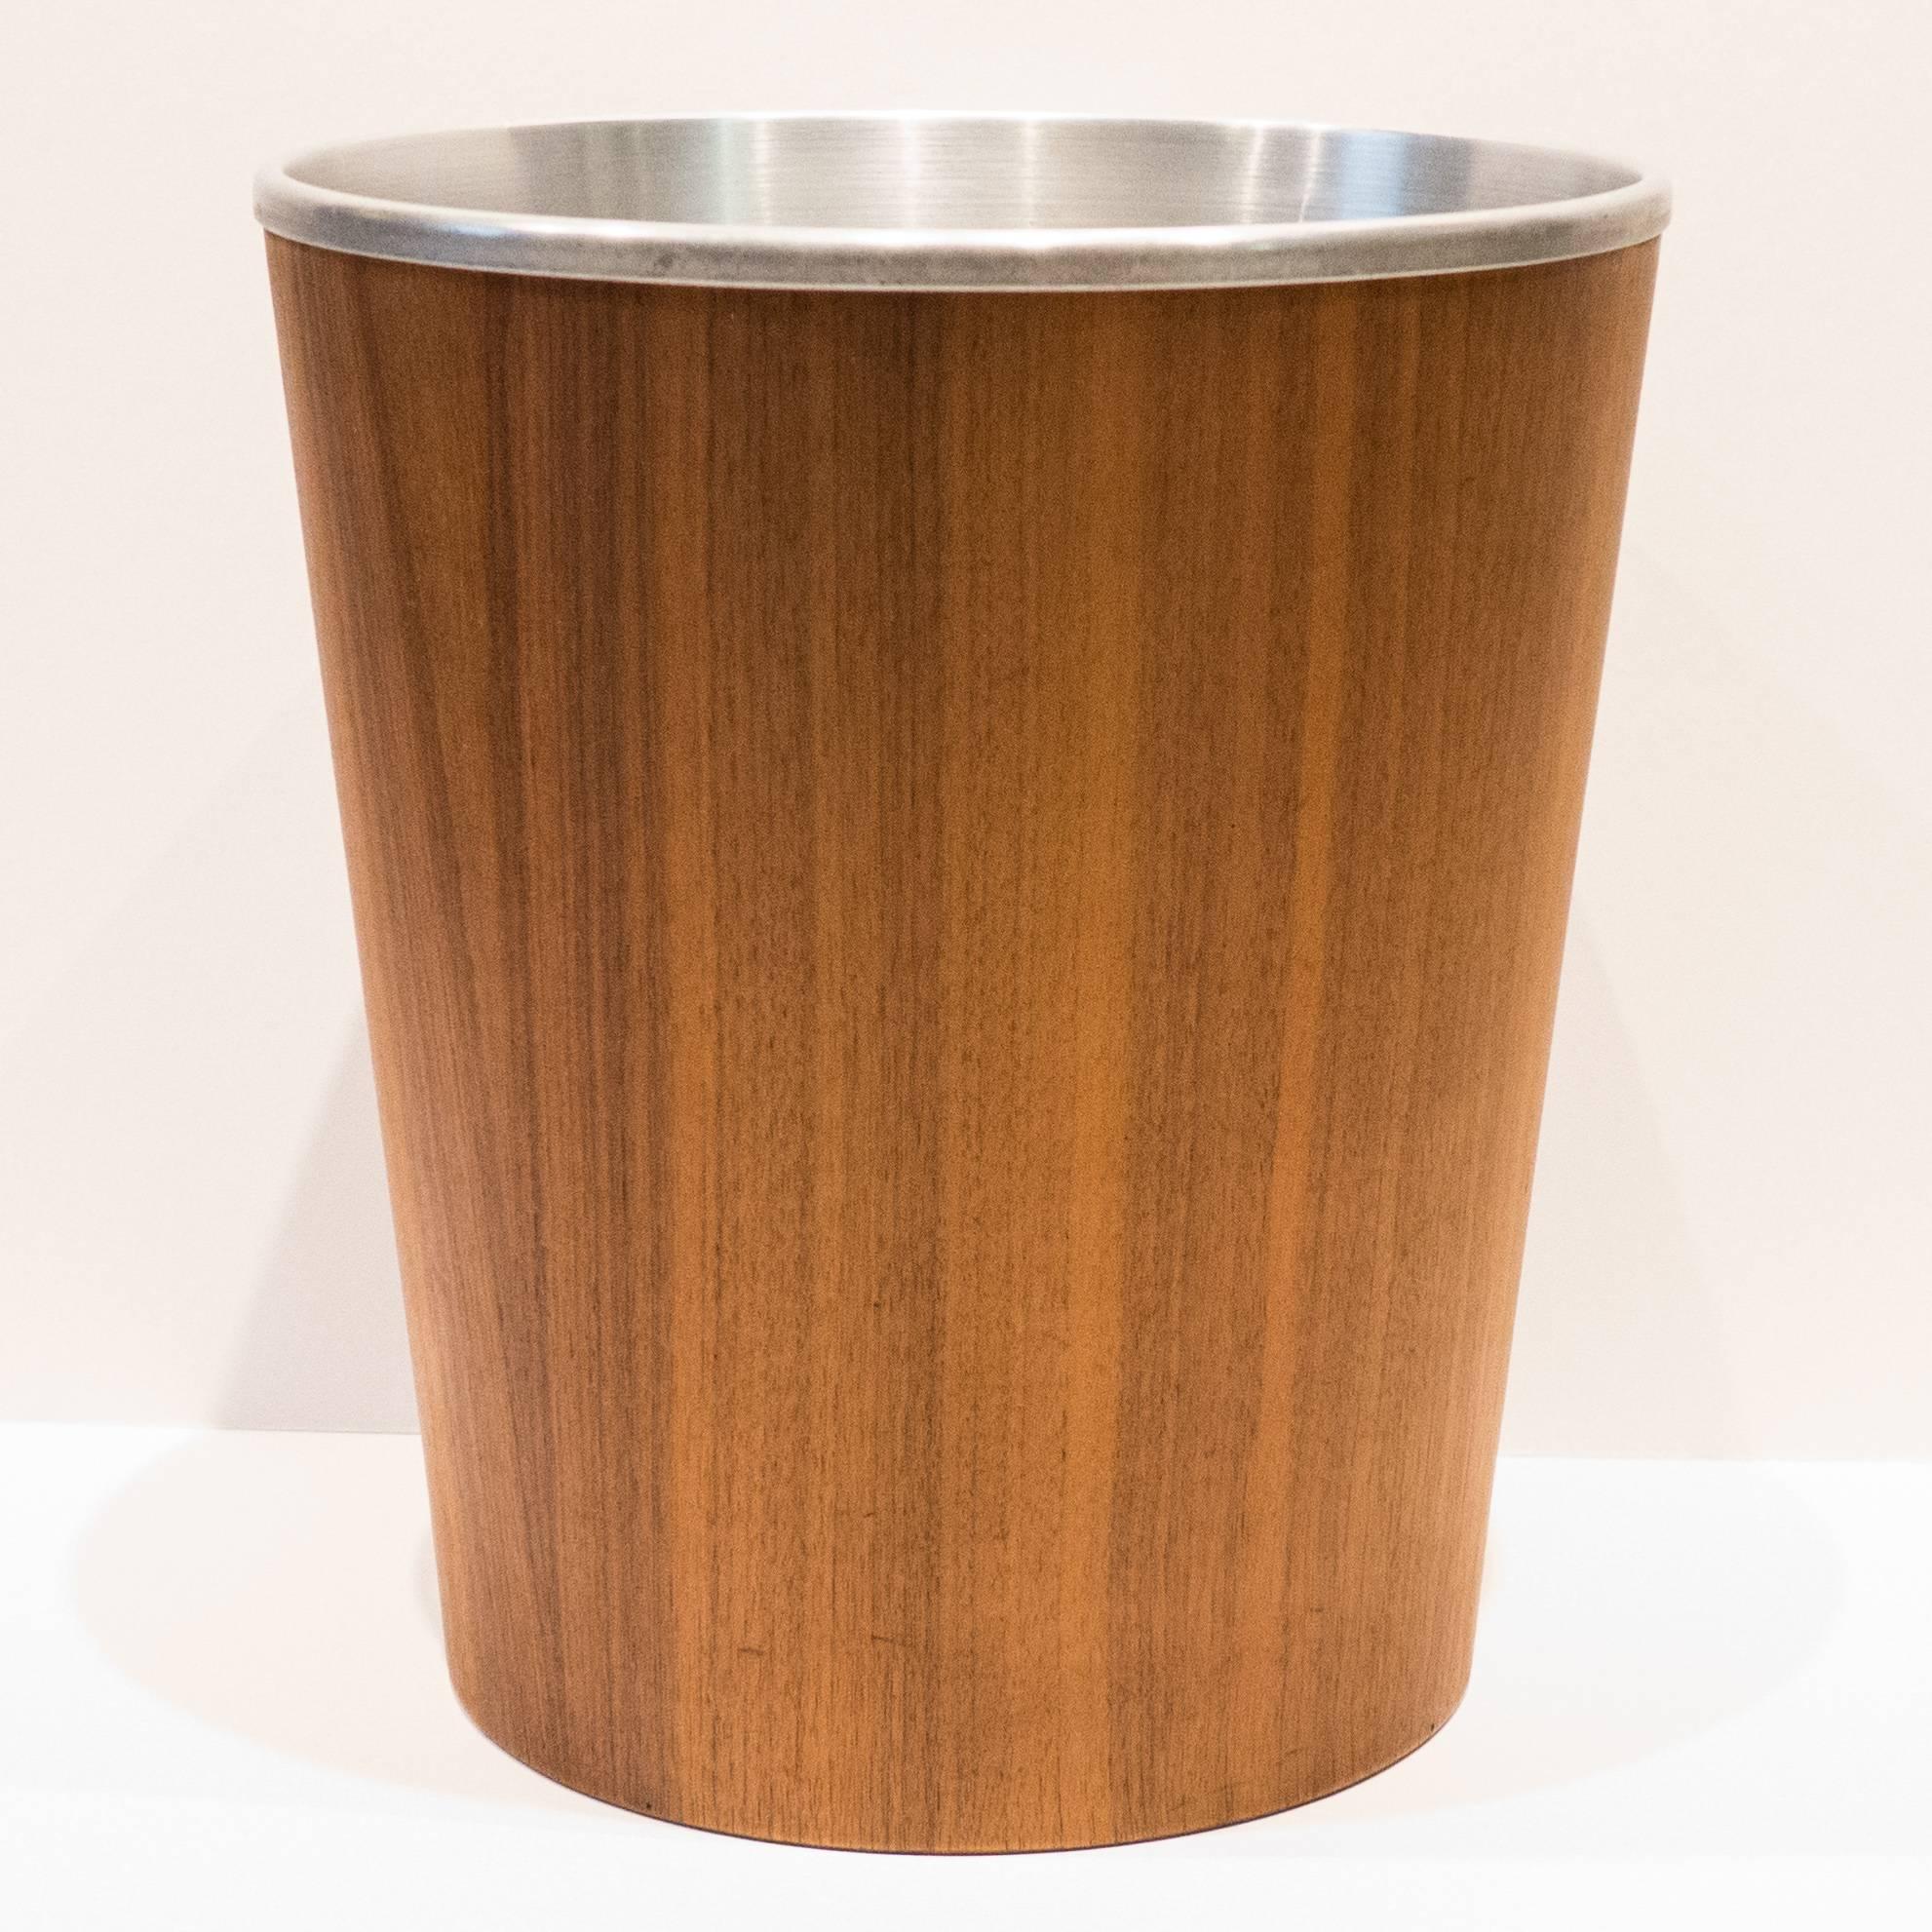 Teak wastebasket with spun aluminium insert. Designed by Martin Aberg for Servex and made in Sweden, circa 1960s. Measure: The diameter at the base is 7.75